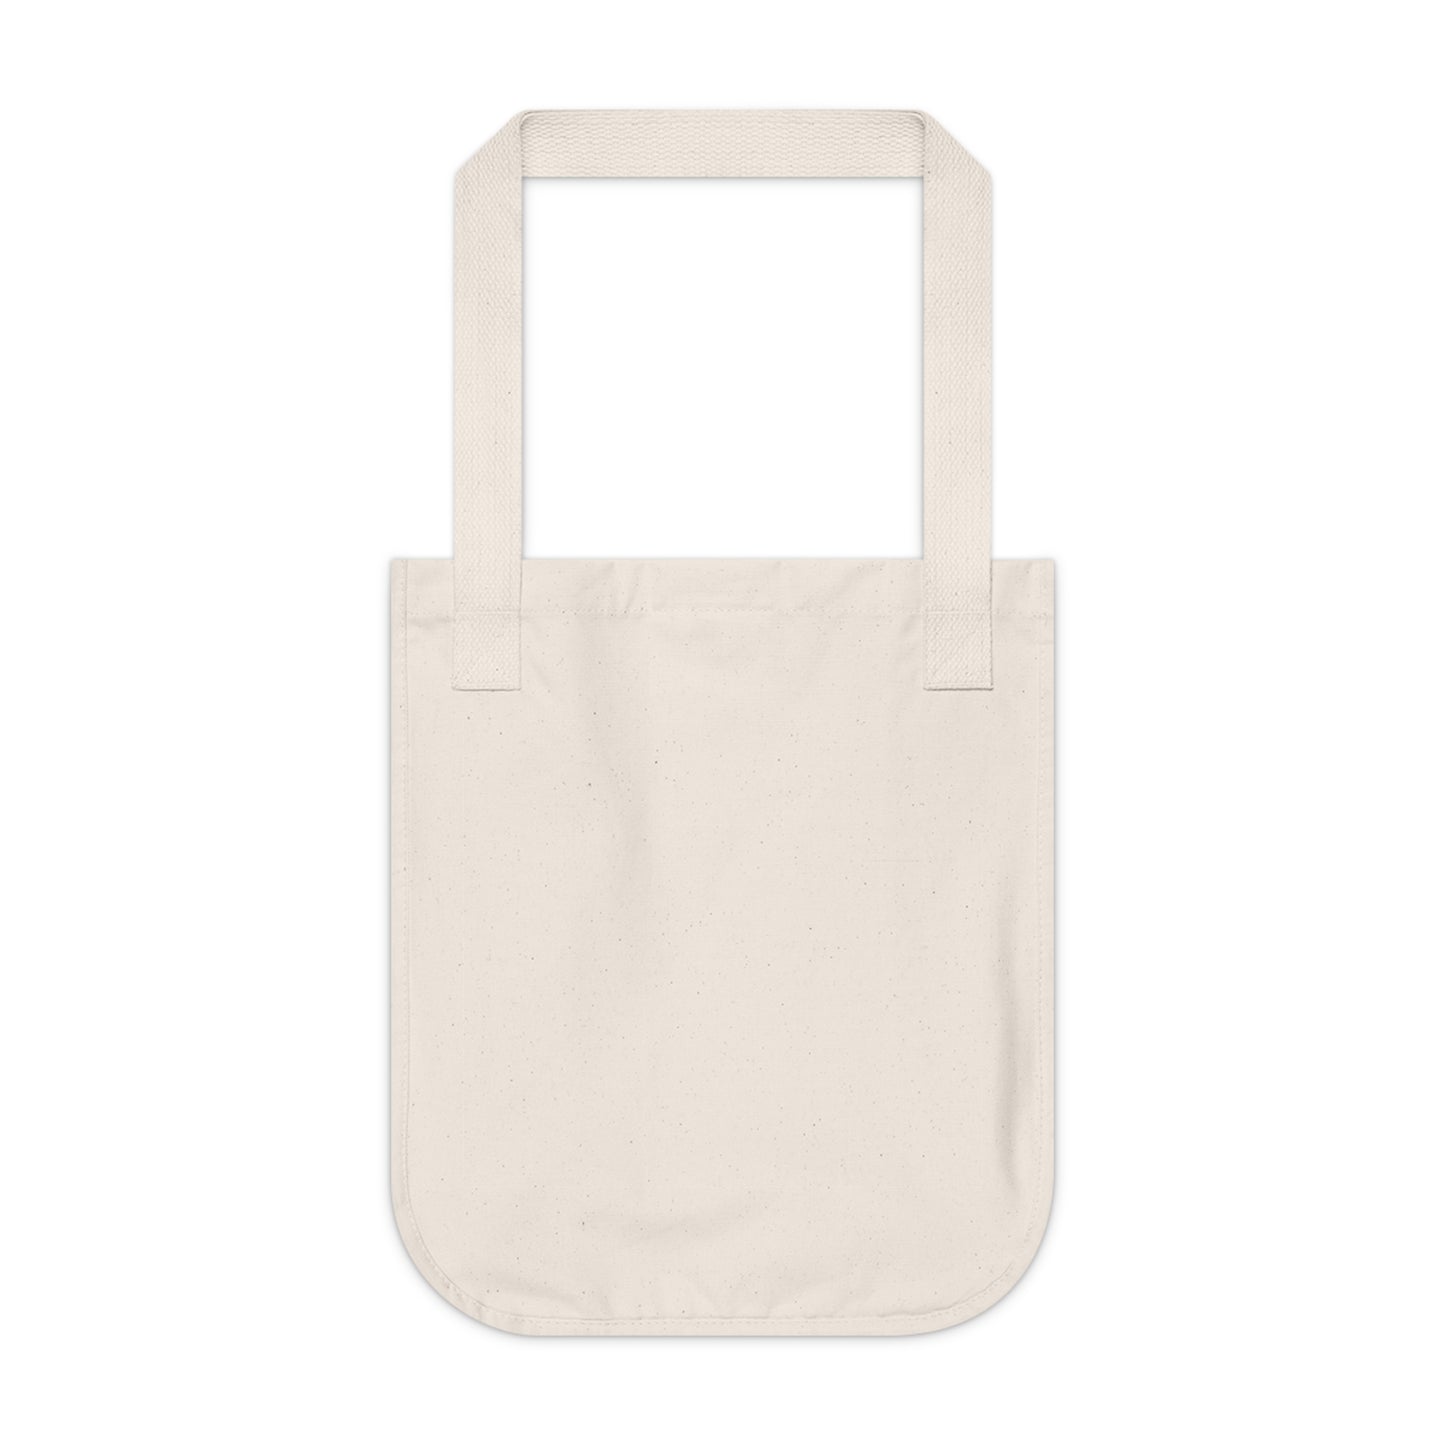 "Nature's Unbounded Beauty" - Bam Boo! Lifestyle Eco-friendly Tote Bag